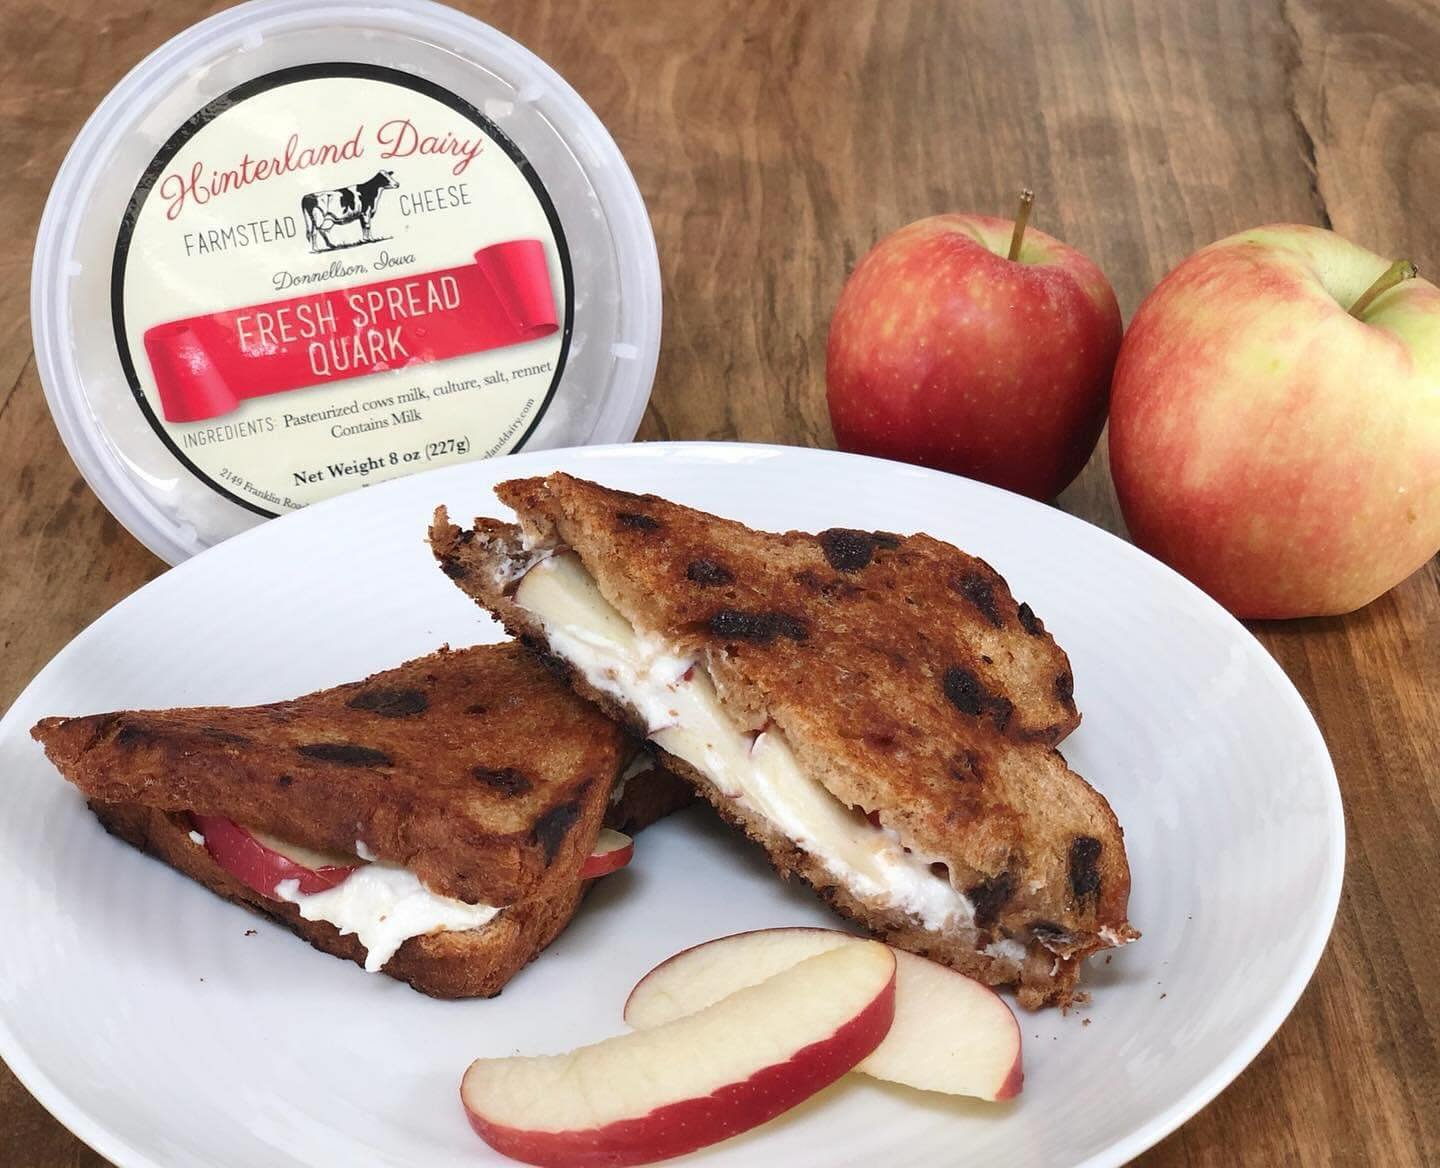 Celebrating #nationalgrilledcheesesandwichday with Hinterland Dairy, Appleberry Orchard and Tulls Honey. All locally made products! Try a sweet and savory grilled cheese!
#localfood #grilledcheese #agriculture #localdairy